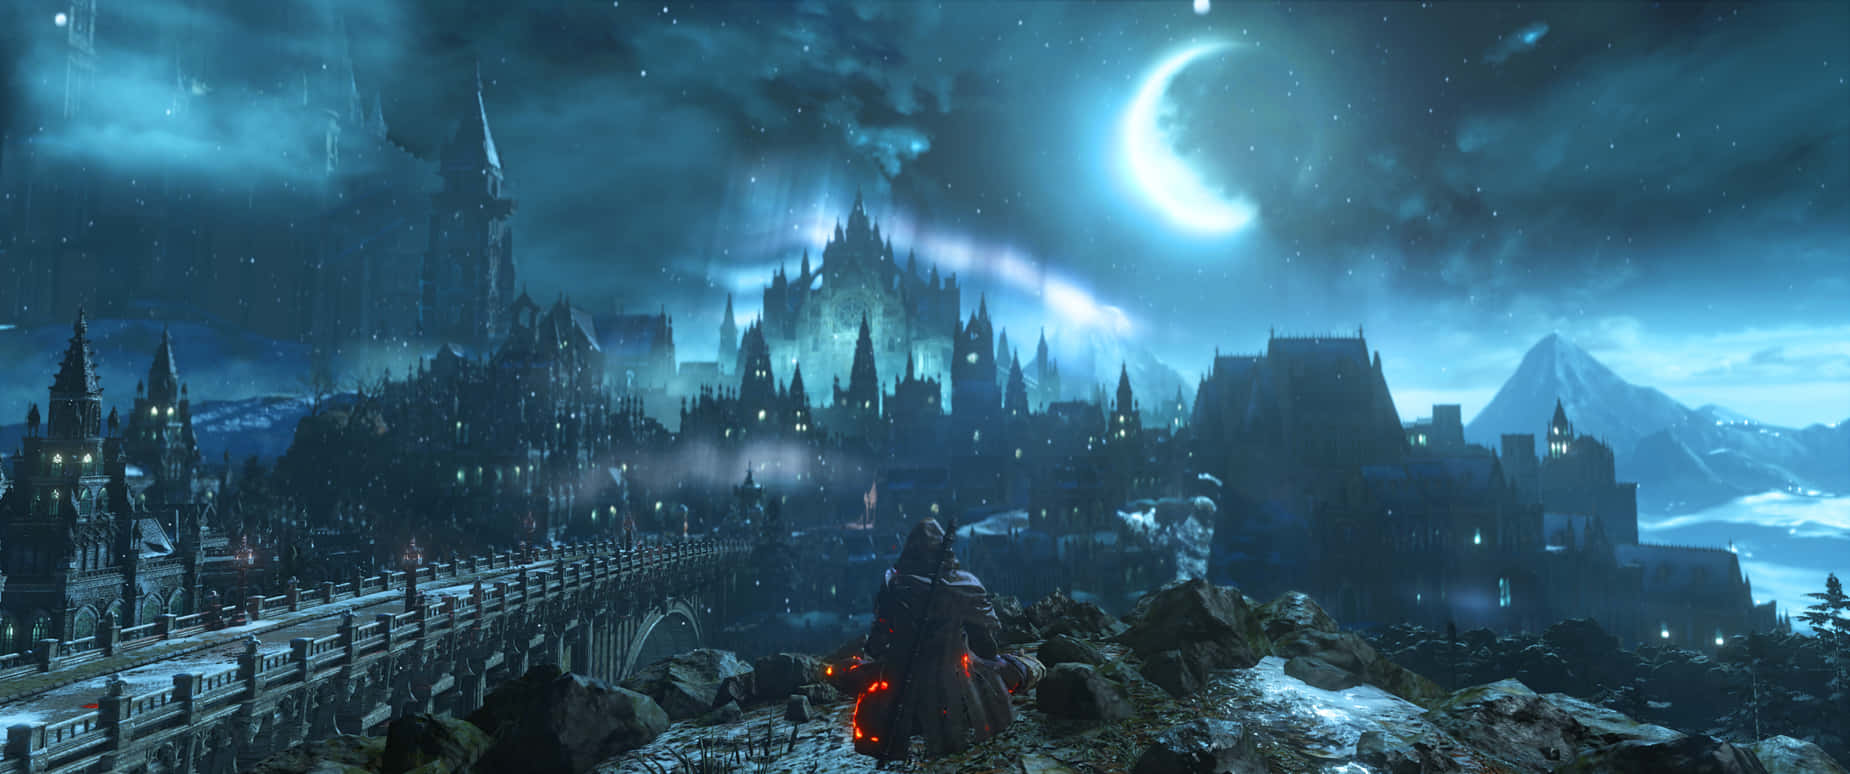 3440x1440game Dark Souls 3 Would Be Translated To 